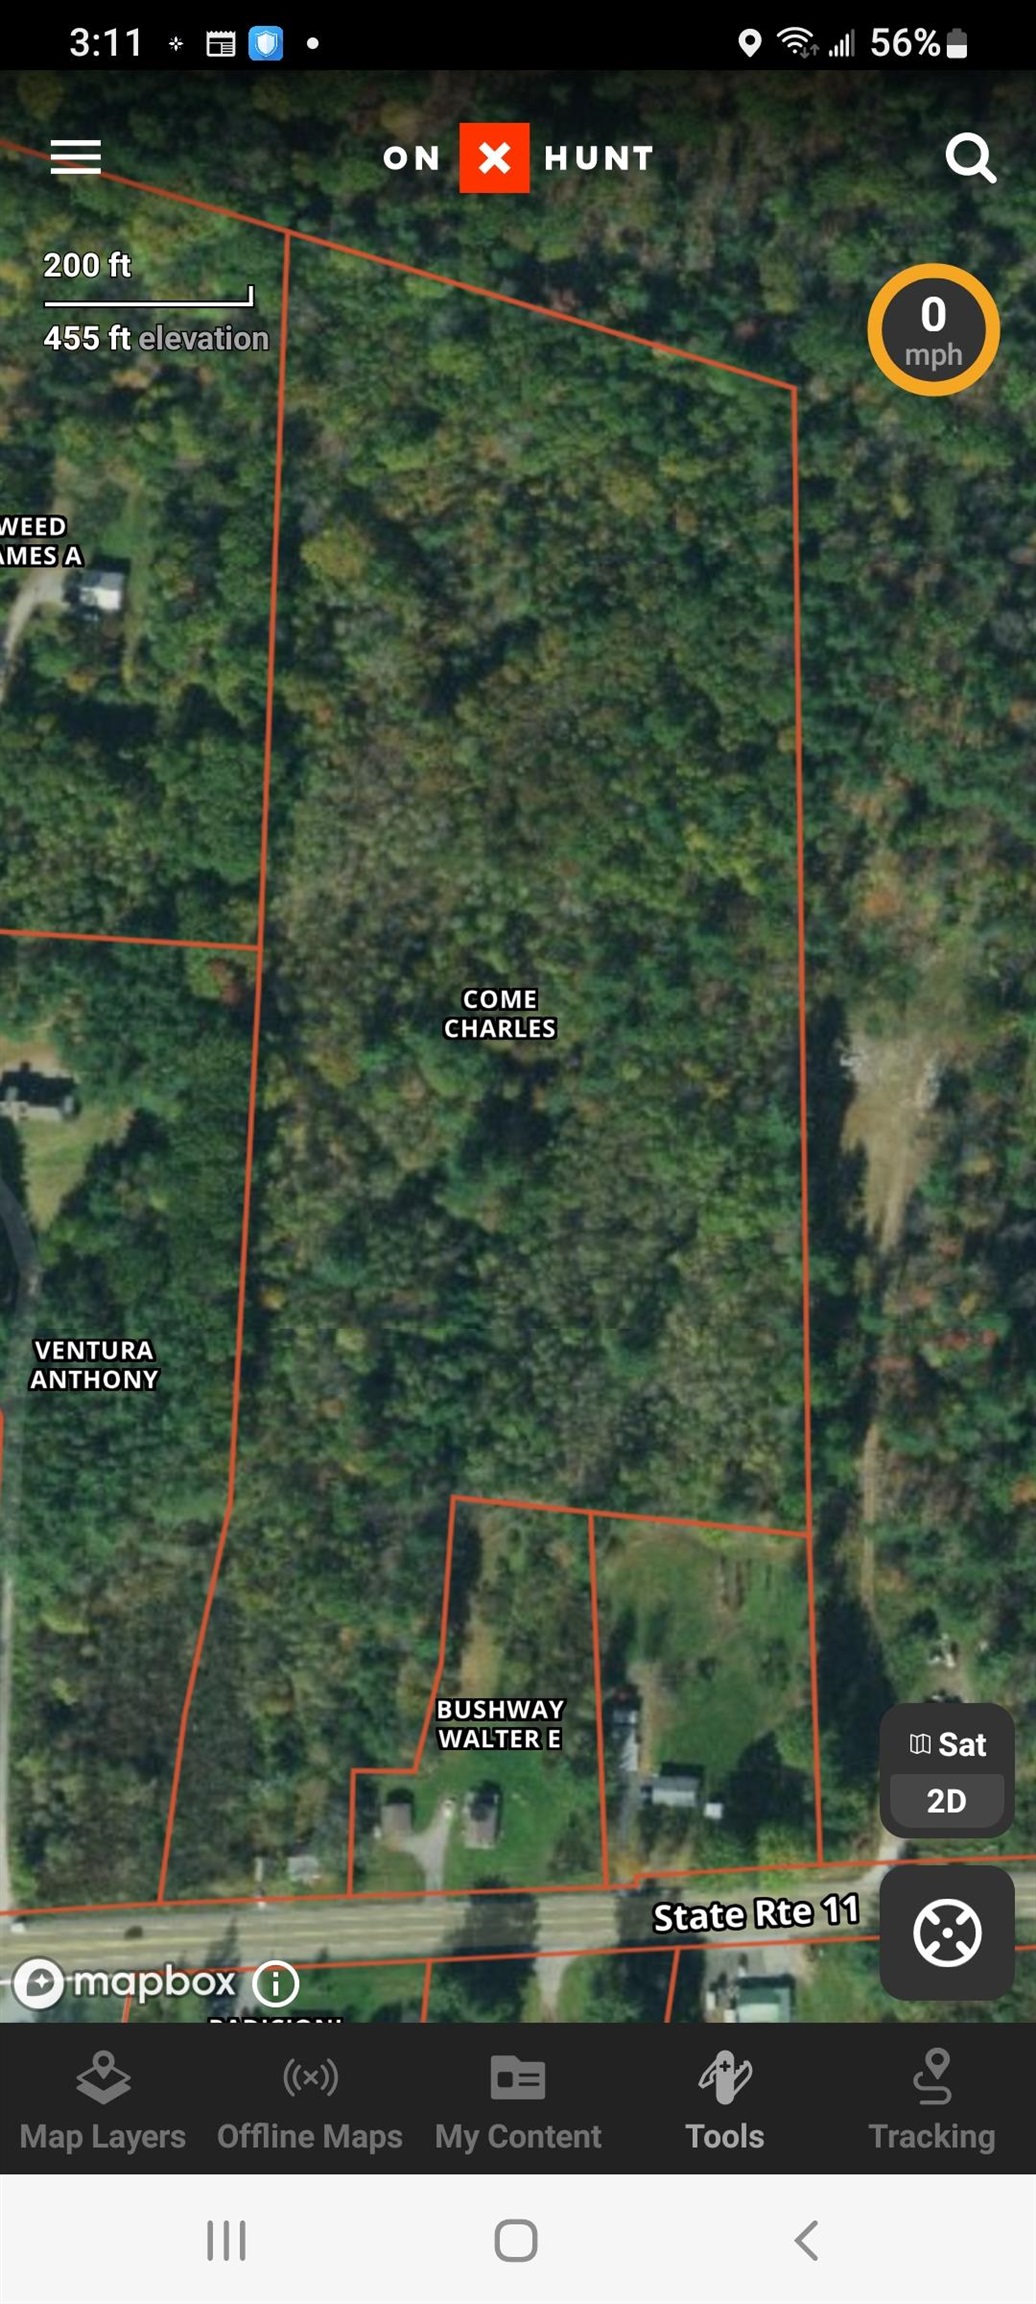 NEWPORT NH Land / Acres for sale